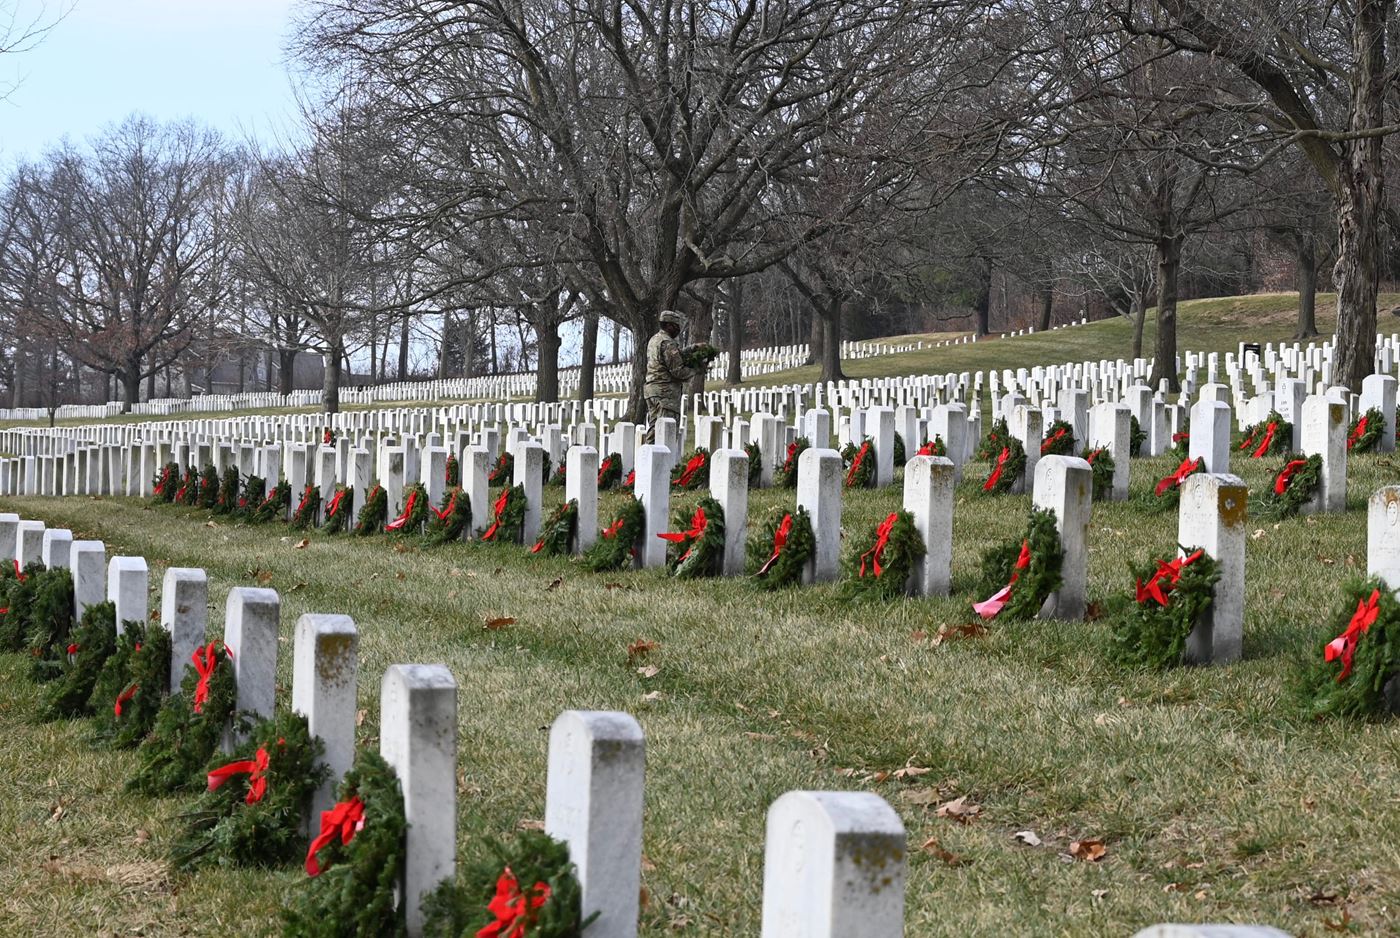 A Fort Leavenworth Soldier works alongside volunteers to lay wreaths on graves during Wreaths Across America Day, Dec. 19, 2020.